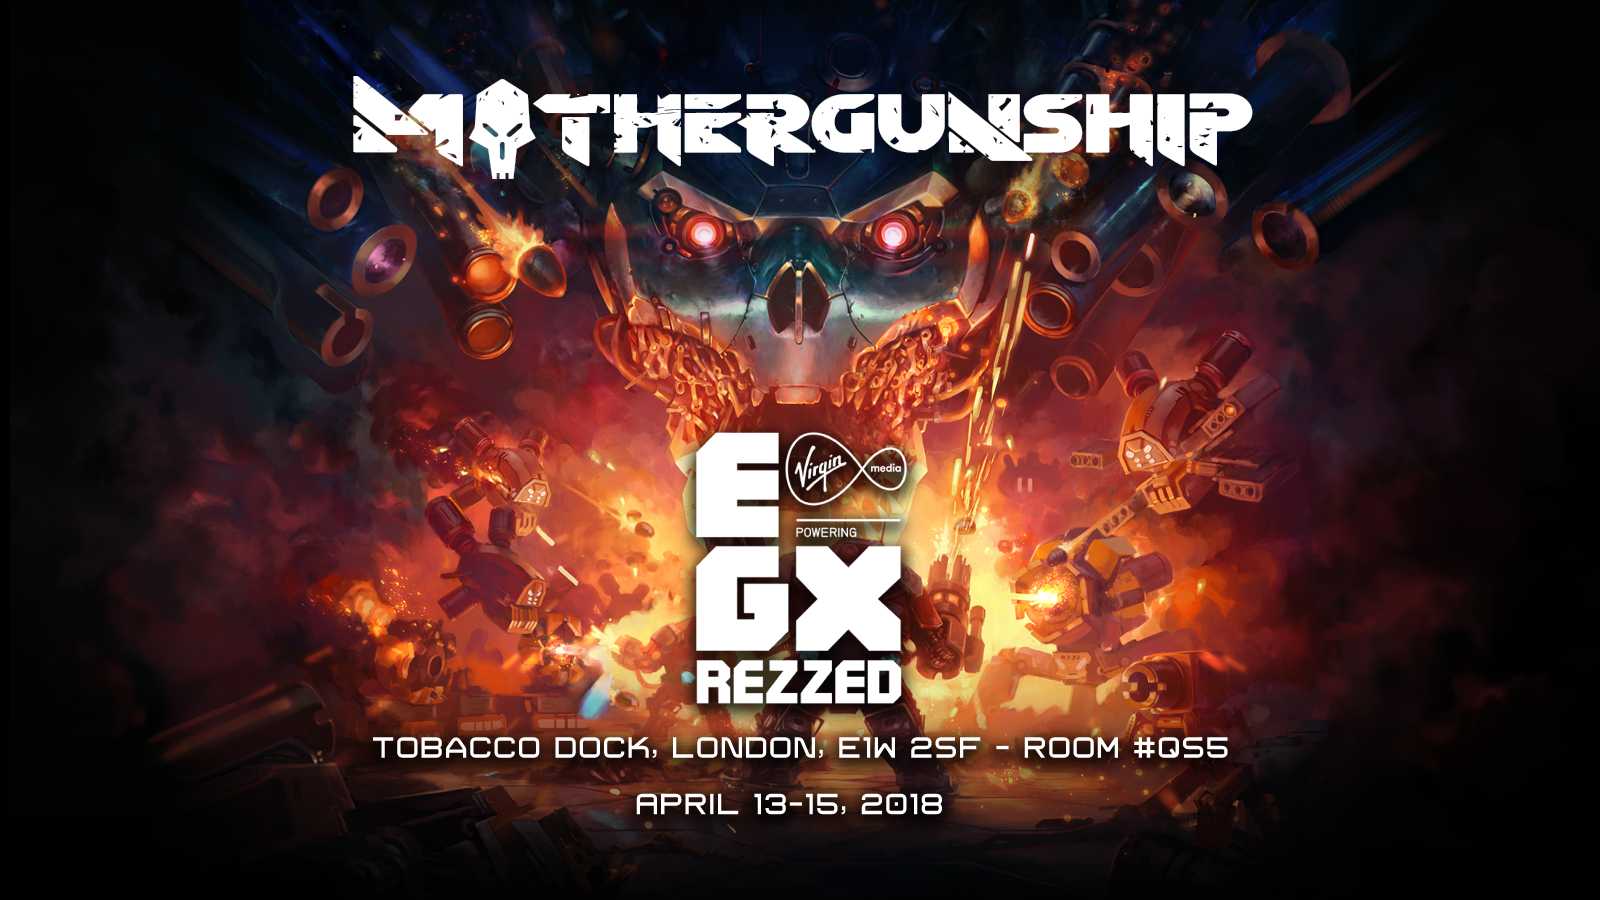 Mothergunship A Twitter After Gdc And Paxeast It Is Time For Egx Rezzed18 We Will Be Showing The Latest Demo Of Mothergunship At London S Biggest Games Event Come Find Us At Room